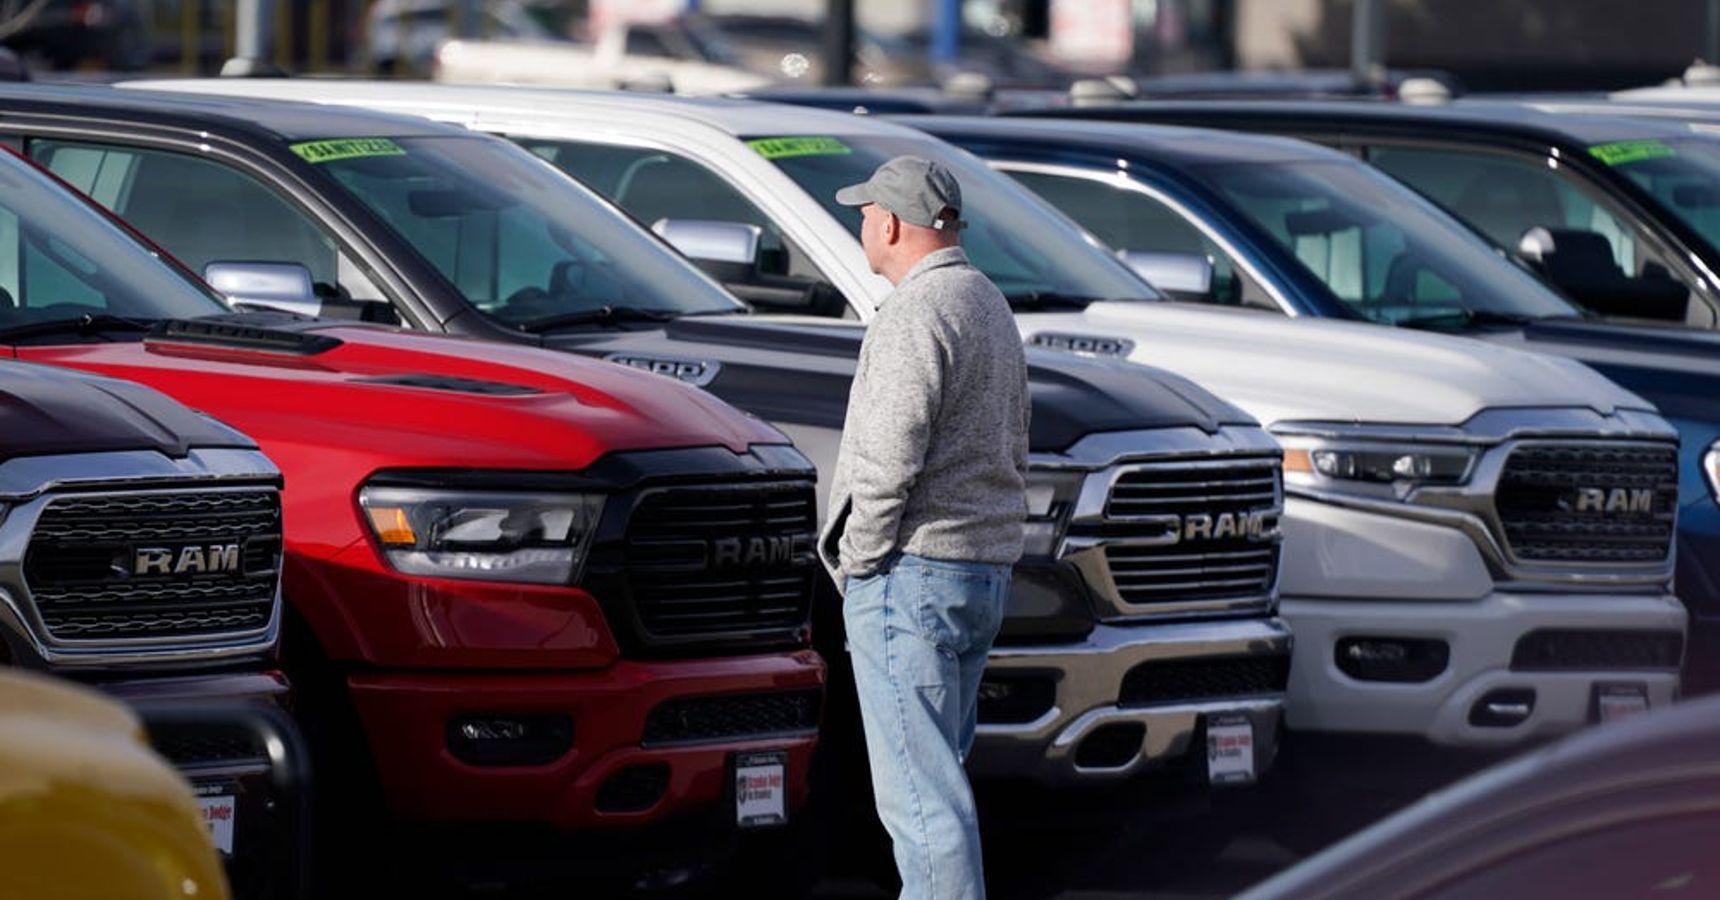 Used Cars Prices Skyrocketing Because Of Chip Shortage